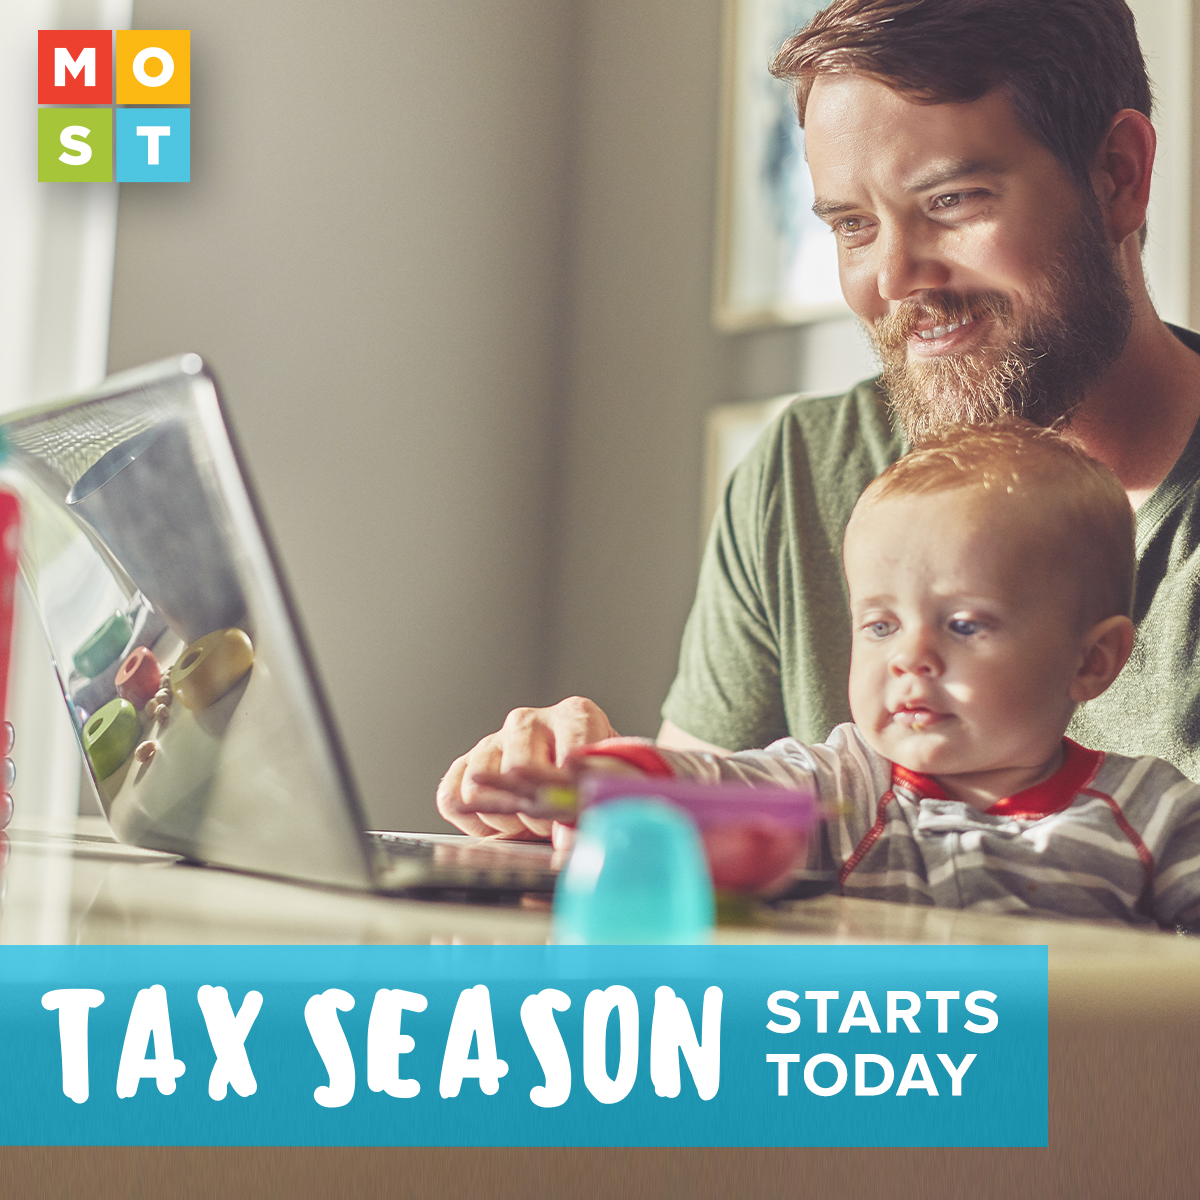 If you’re a Missouri resident, you could be saving for your child’s education – and enjoying a significant state tax deduction – just by opening a MOST 529 account. Learn how to take advantage of 529 tax benefits at missourimost.org/home/529-featu…